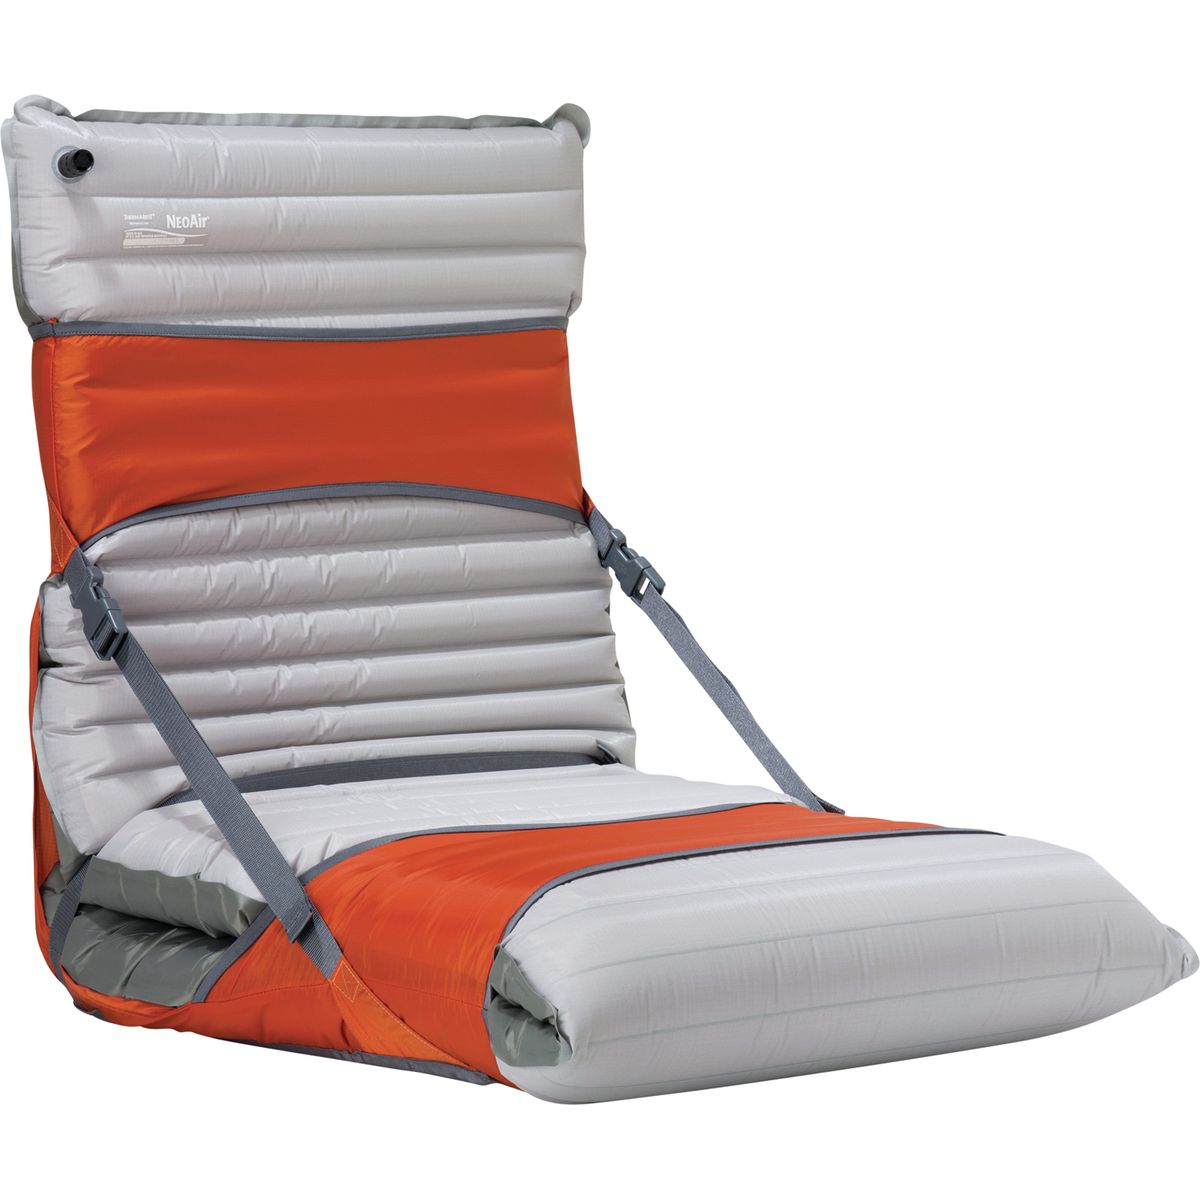 Abnorm Sober tilbede Therm-a-Rest Therm-a-Rest Trekker Lounge Chair Kit - Hike & Camp